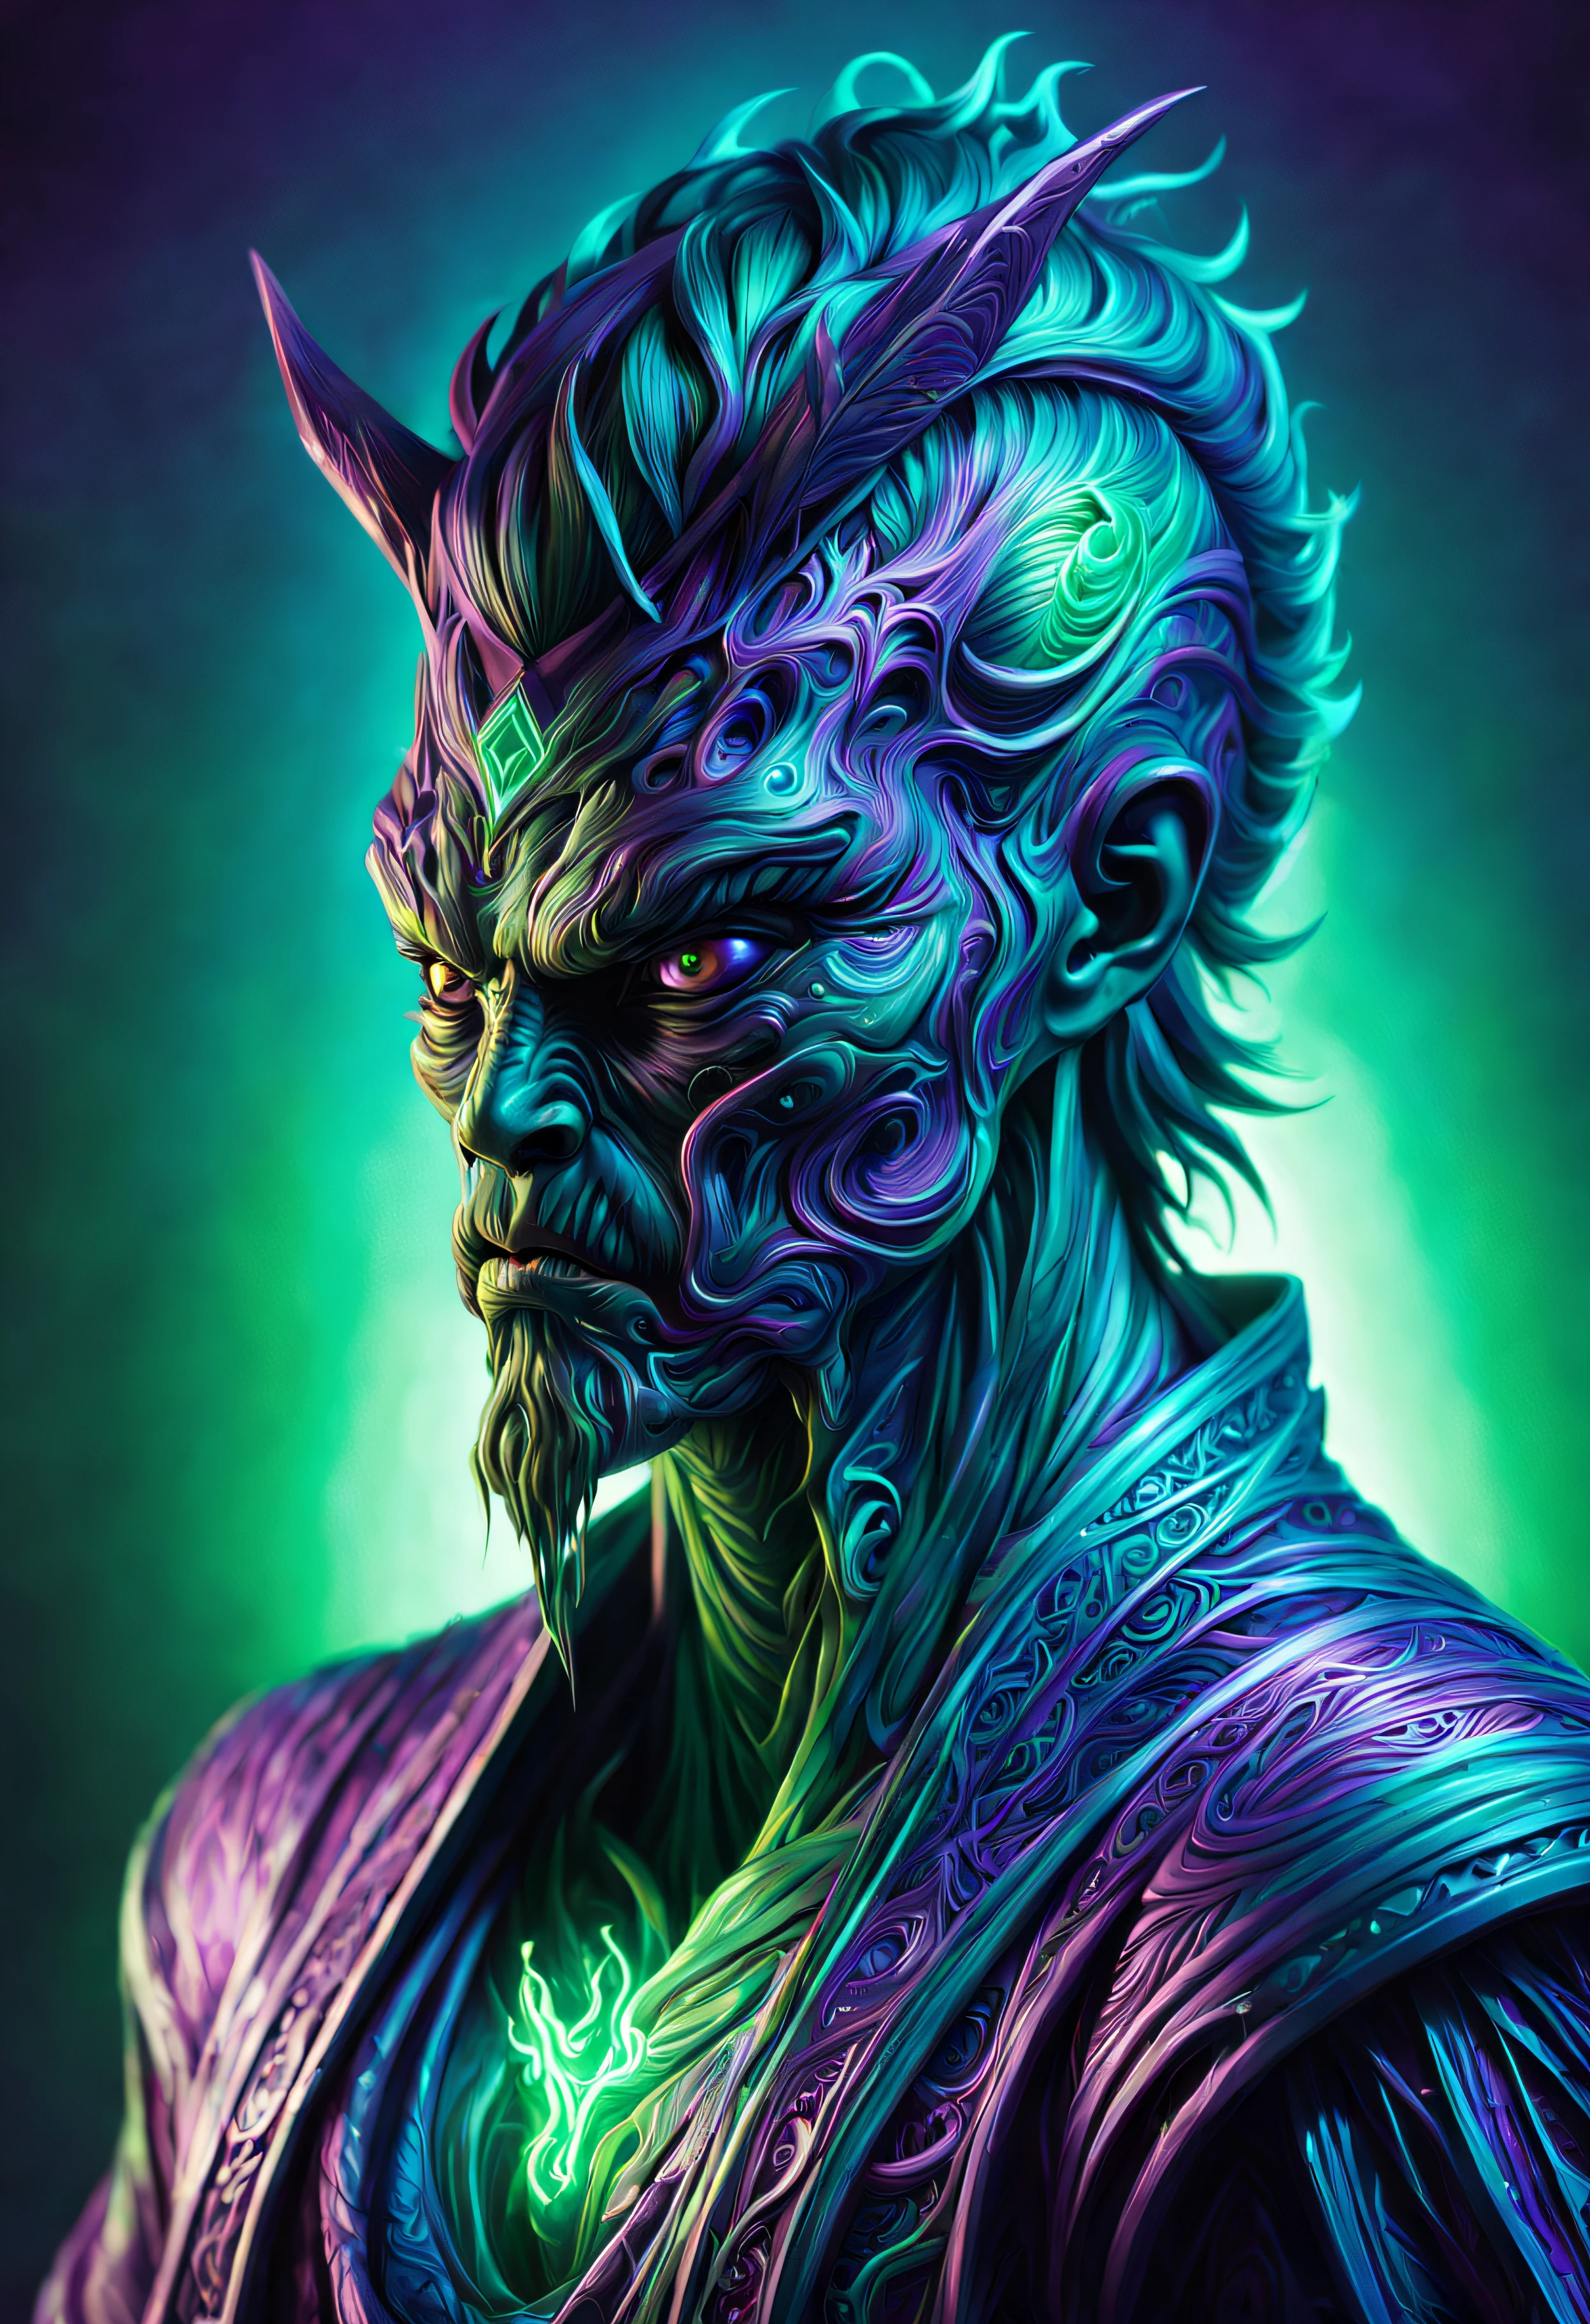 art by Marek Okon and dan mumford,  Yarn model of a large Brother, the Brother is Luminous, Samurai, elegant, Cryptidcore, anaglyph filter, neon green and purple color, alienzkin